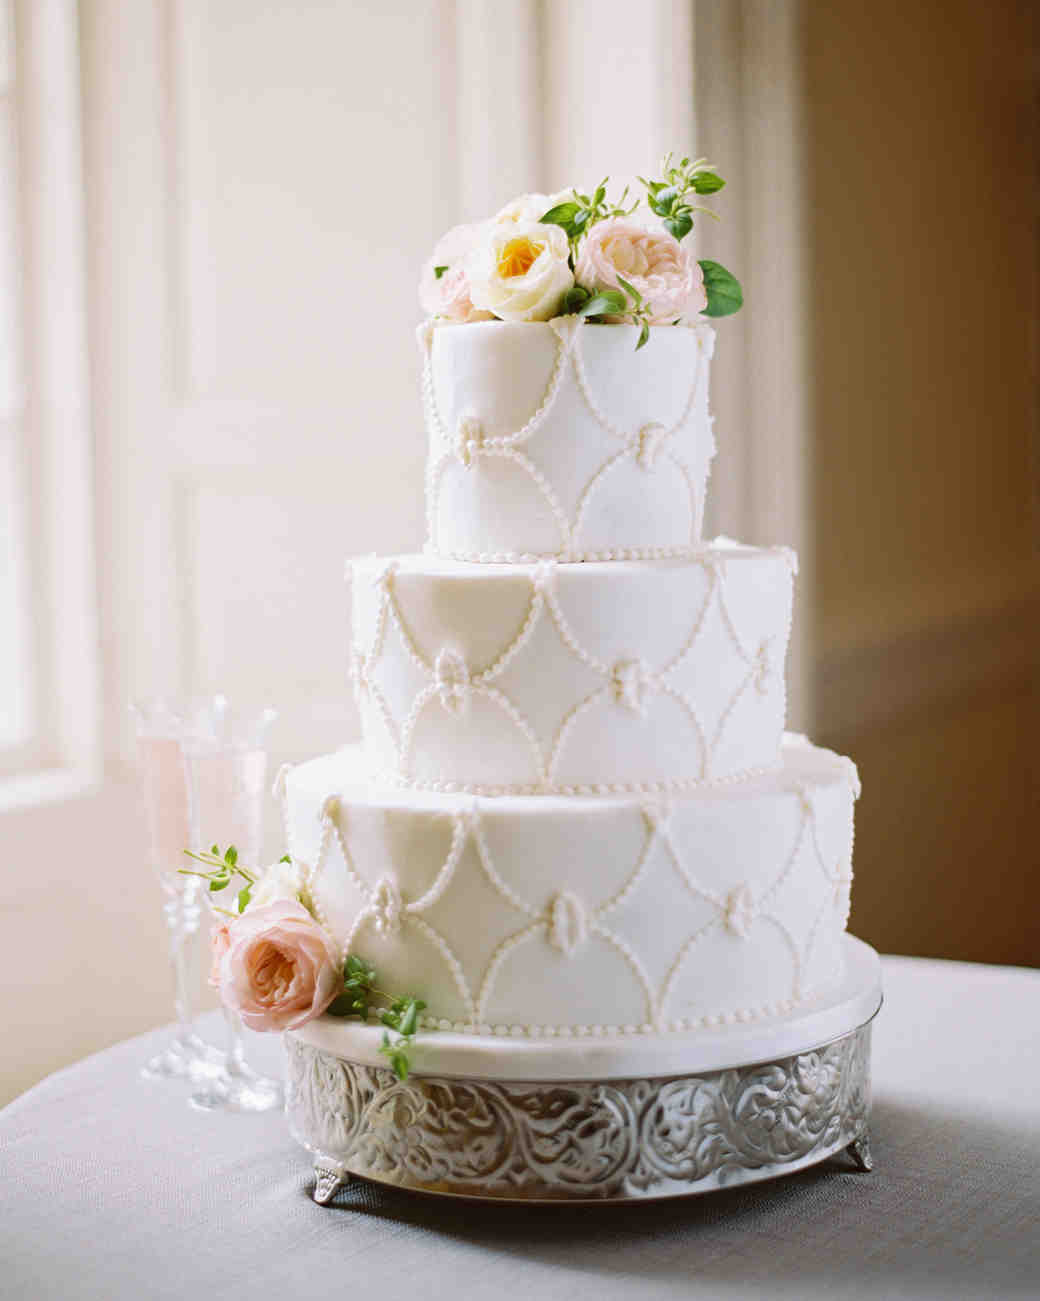 Wedding Cakes Buttercream
 32 Amazing Wedding Cakes You Have to See to Believe